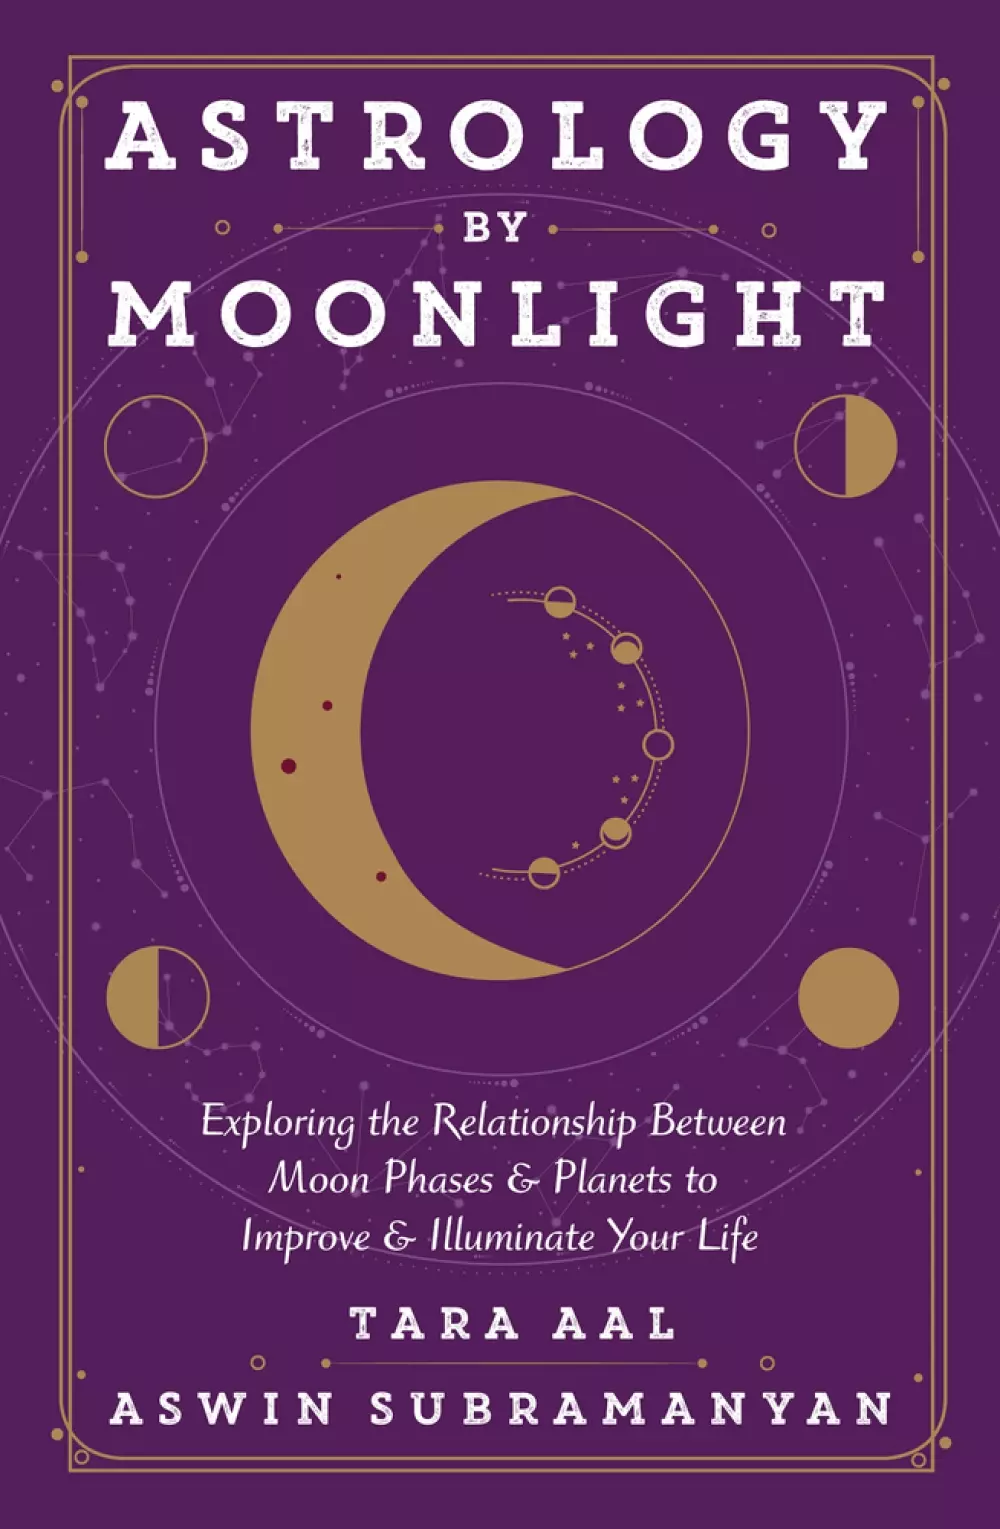 Astrology by Moonlight, ingen, EXPLORING THE RELATIONSHIP BETWEEN MOON PHASES & PLANETS TO IMPROVE & ILLUMINATE YOUR LIFE